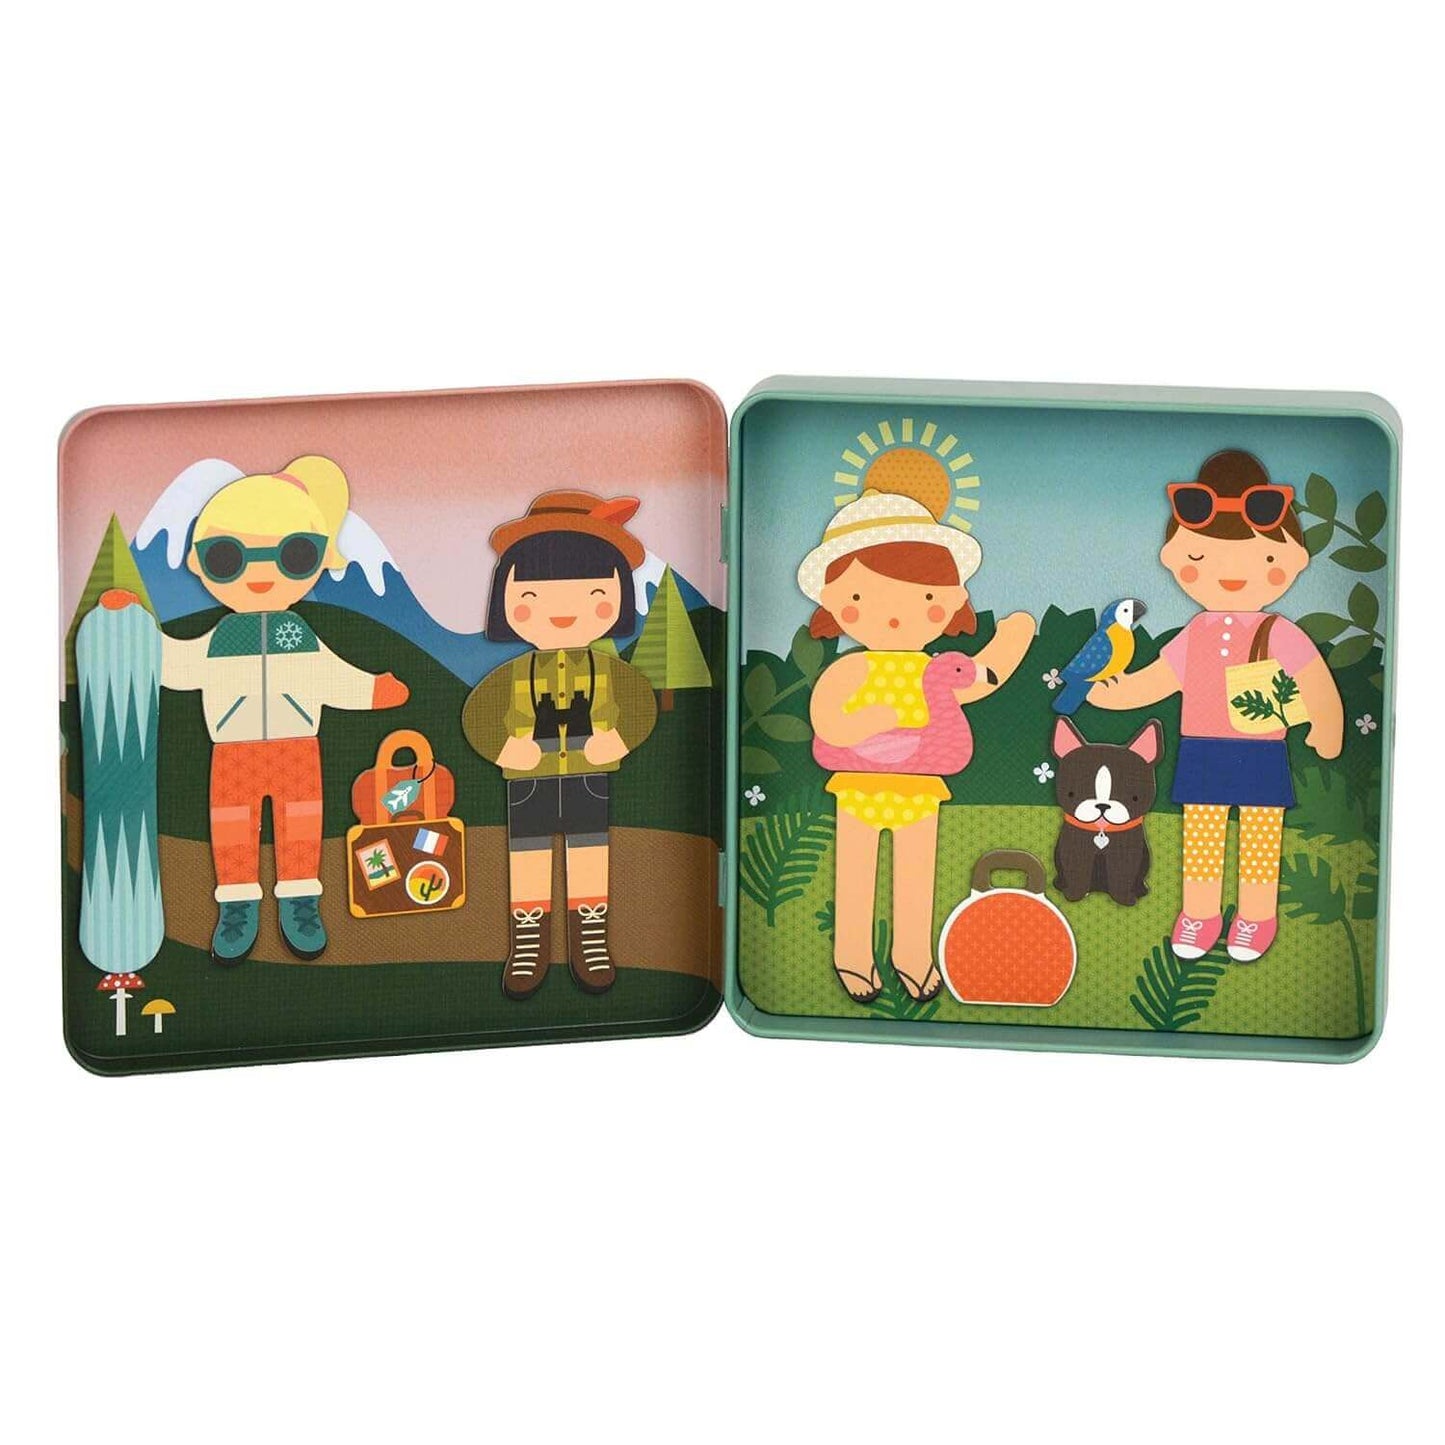 Little Travelers Magnetic Playset